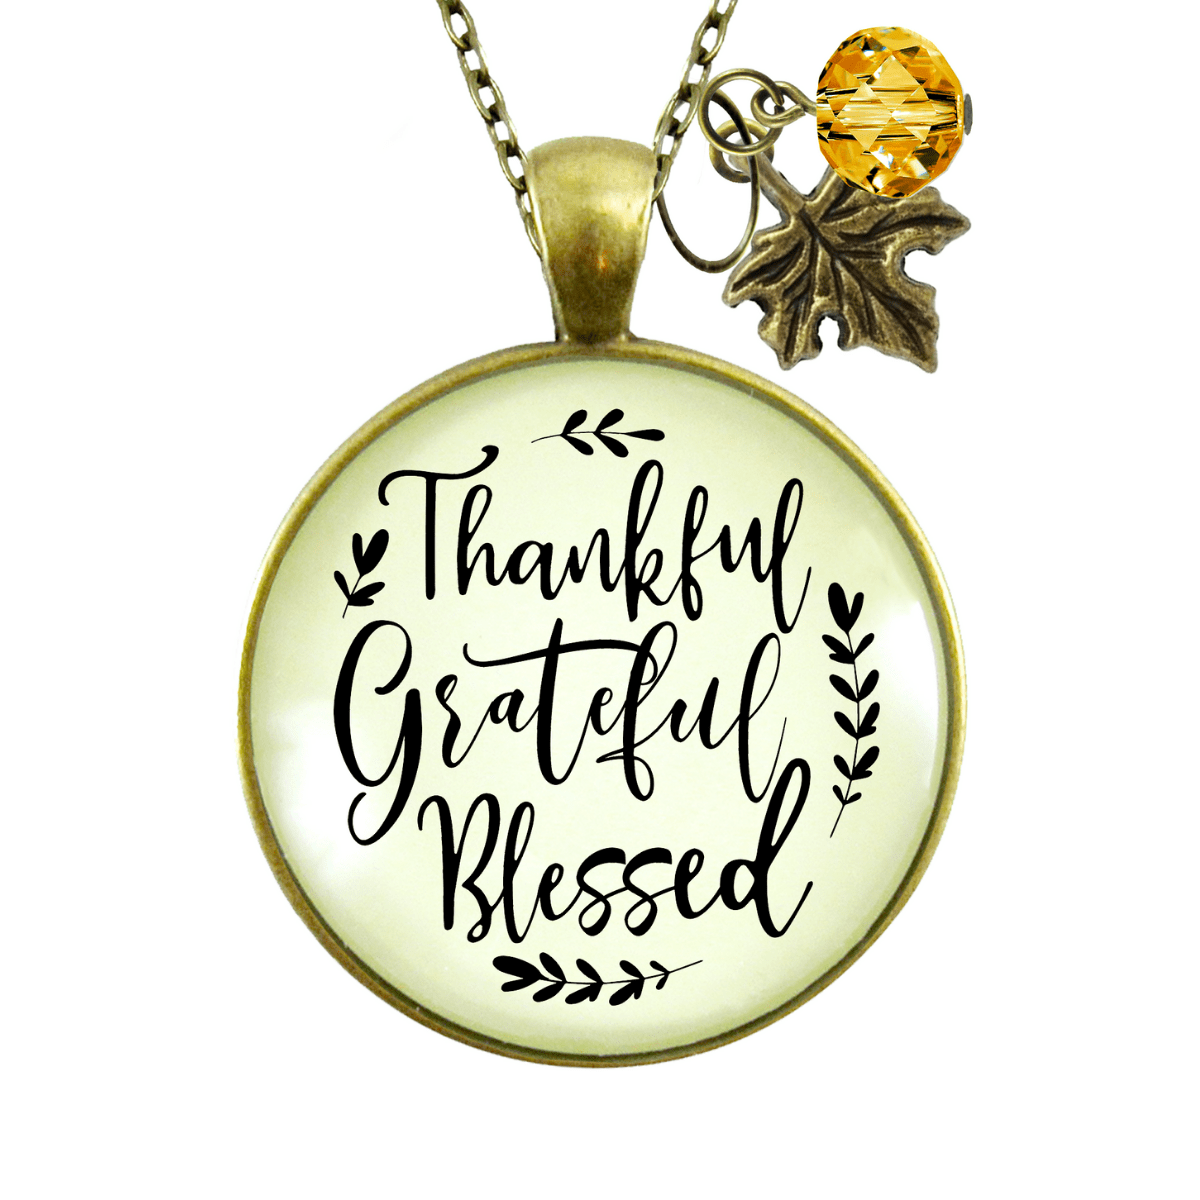 Gutsy Goodness Autumn Necklace Thankful Grateful Blessed Inspirational Leaf Jewelry - Gutsy Goodness Handmade Jewelry;Autumn Necklace Thankful Grateful Blessed Inspirational Leaf Jewelry - Gutsy Goodness Handmade Jewelry Gifts